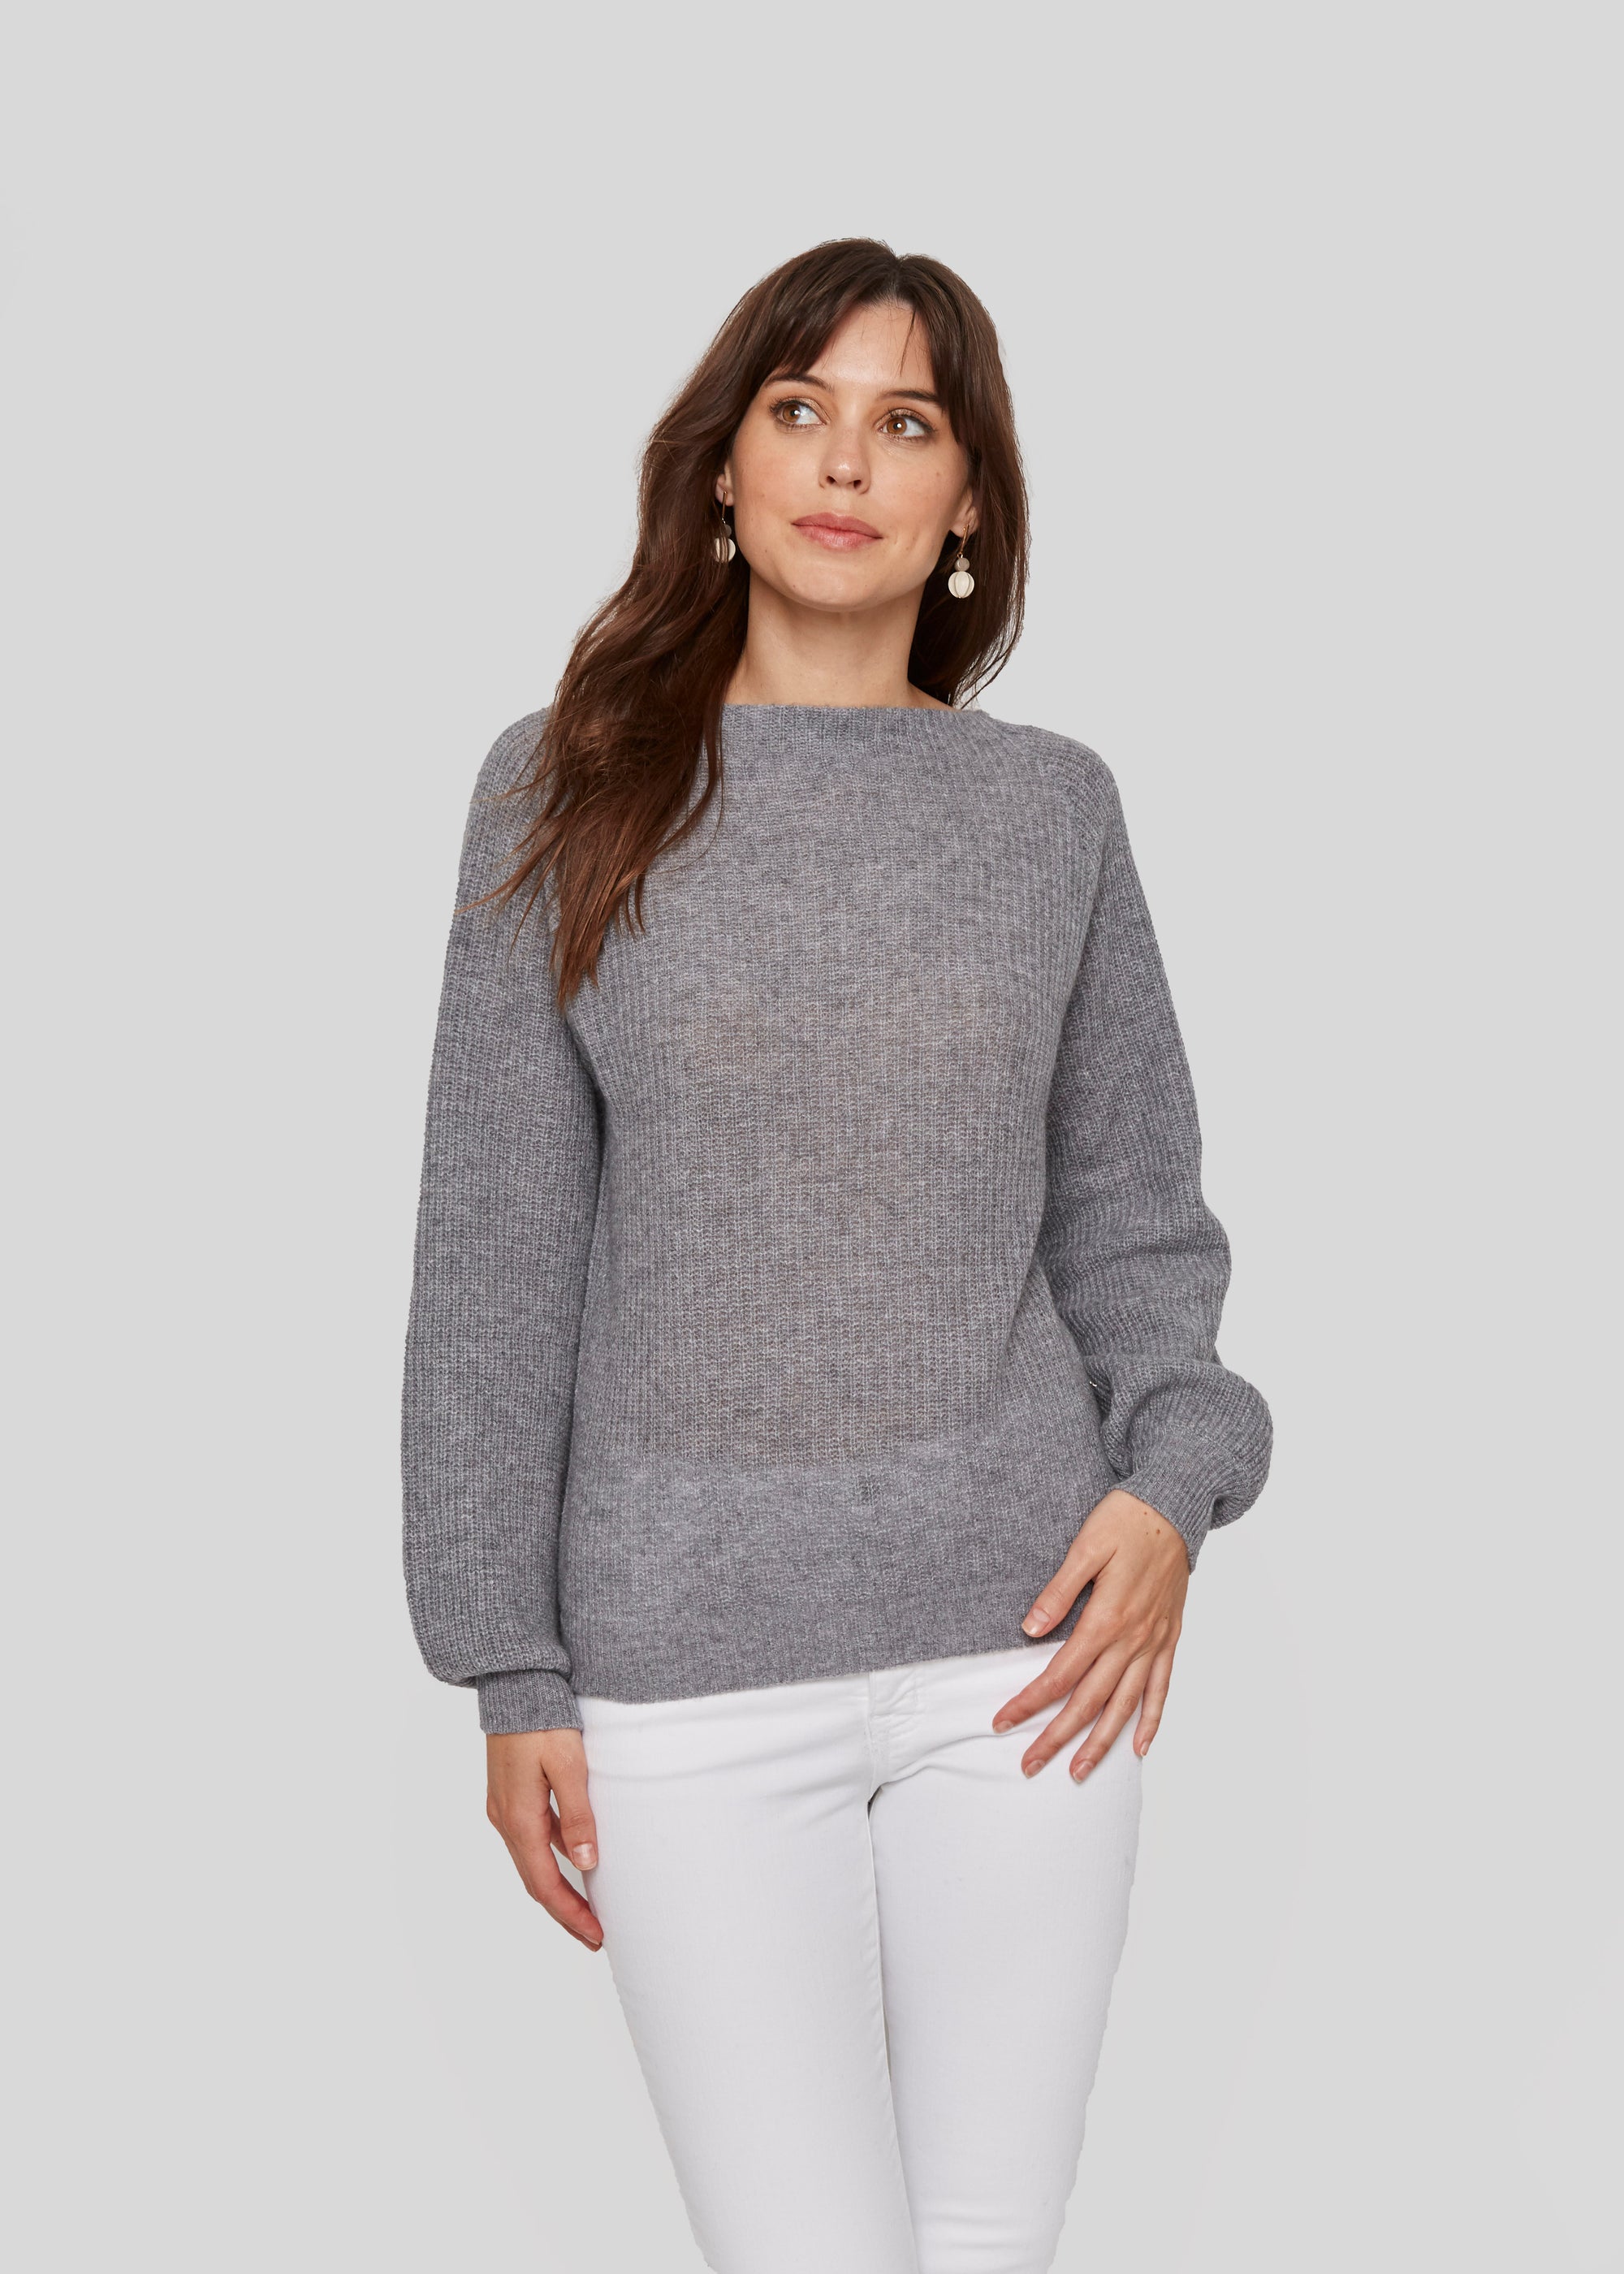 women grey relax casual  boat neck bateau neck cashmere sweater top layer knitwear